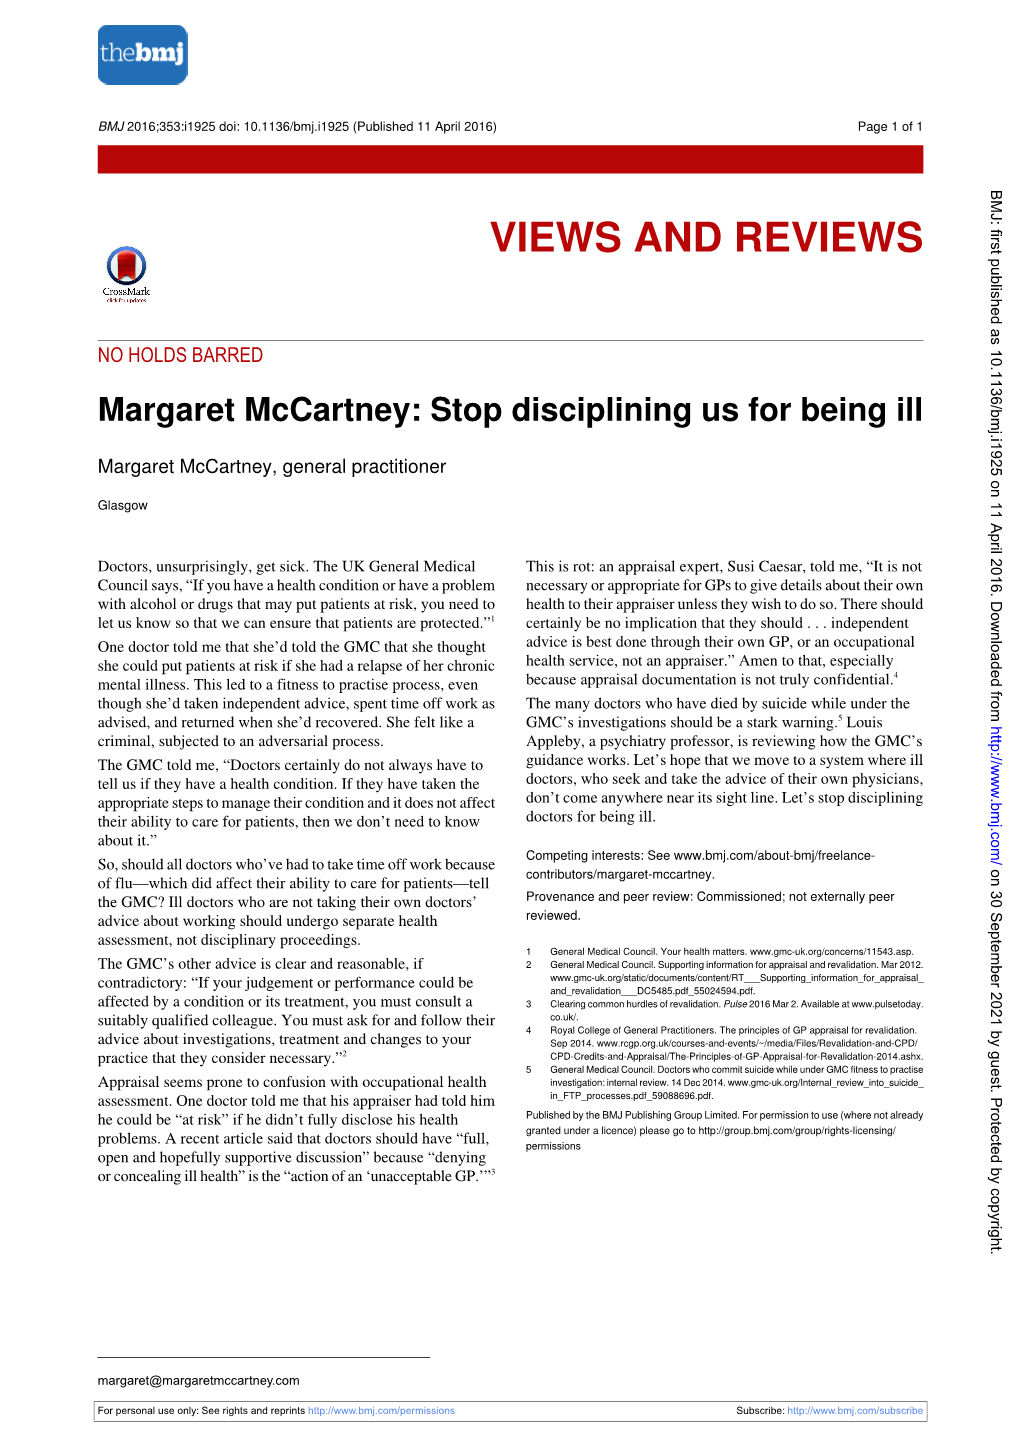 Margaret Mccartney: Stop Disciplining Us for Being Ill